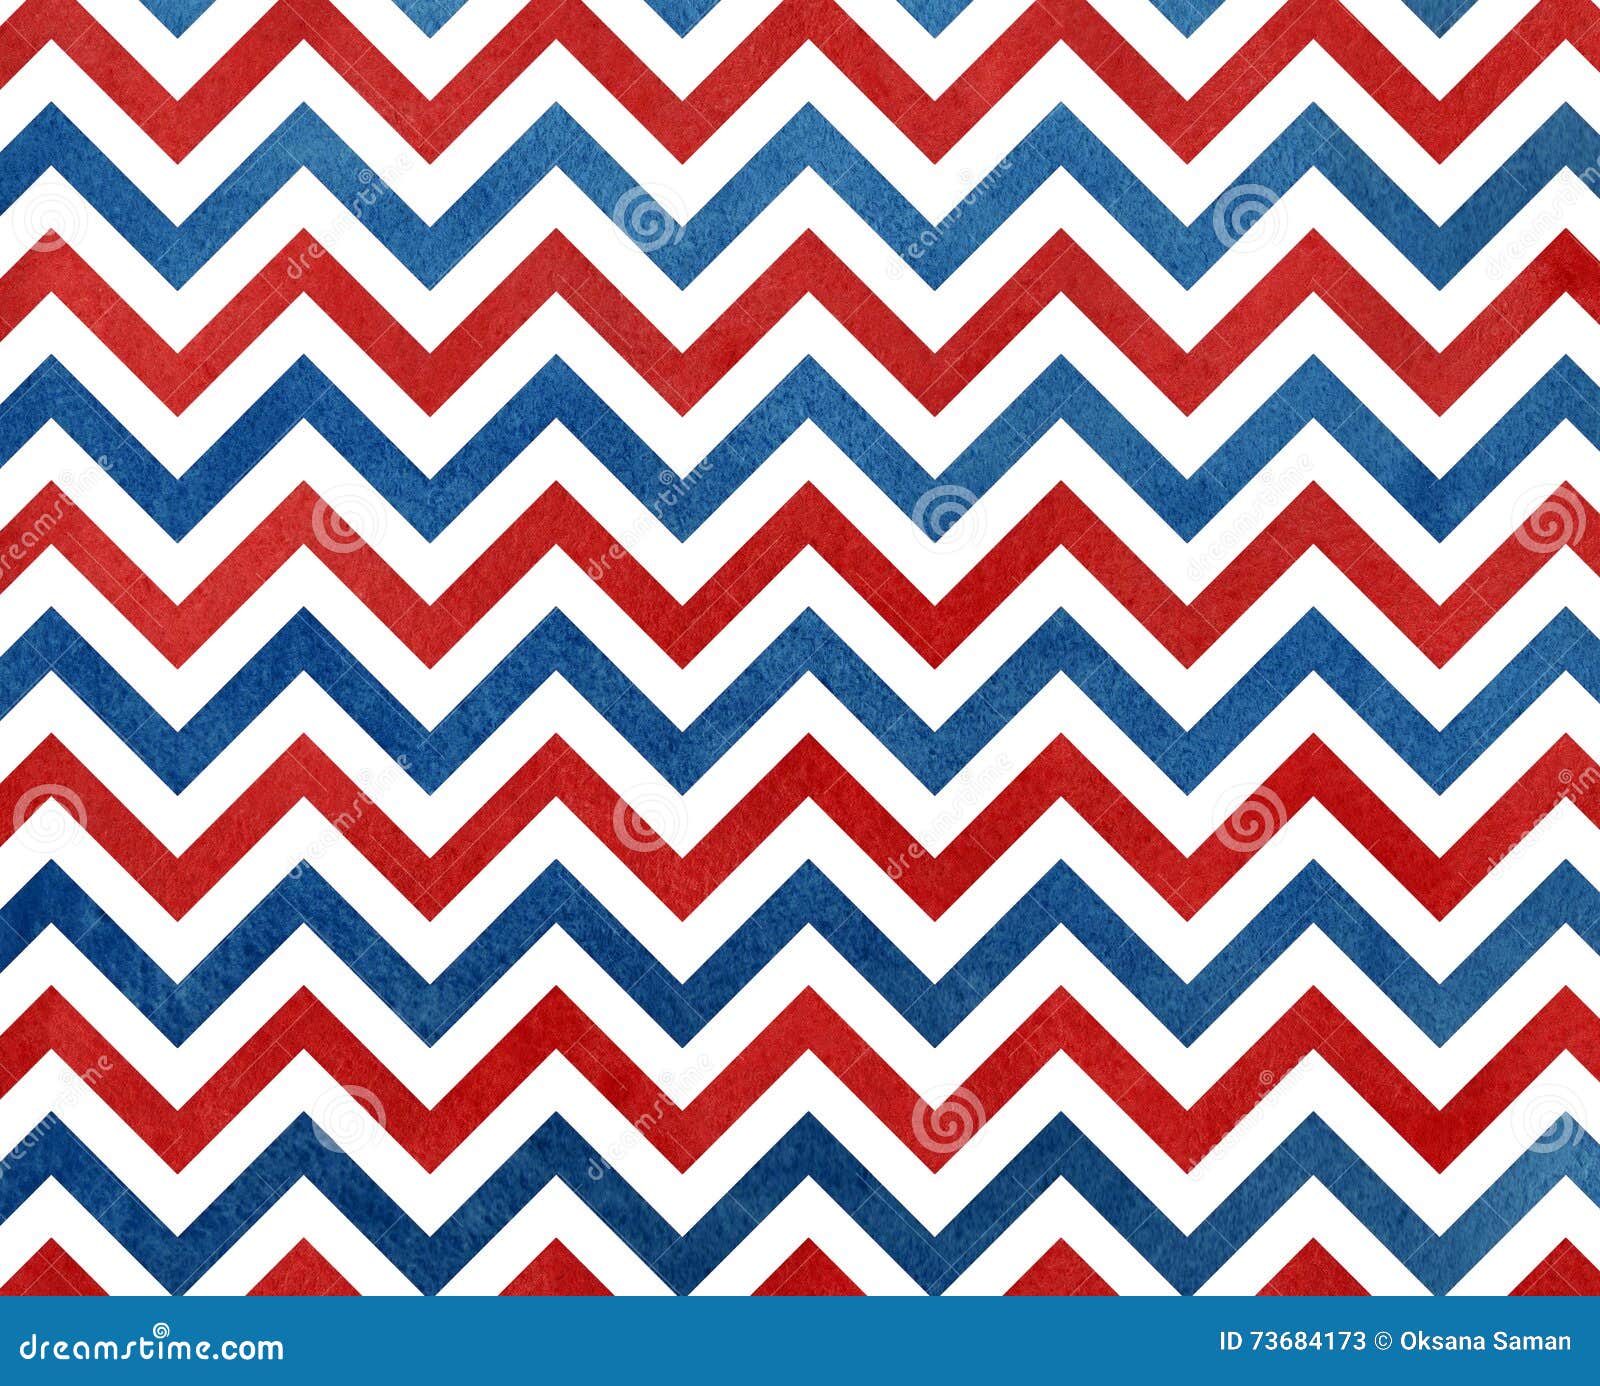 Watercolor Dark Blue And Red Stripes Background Chevron